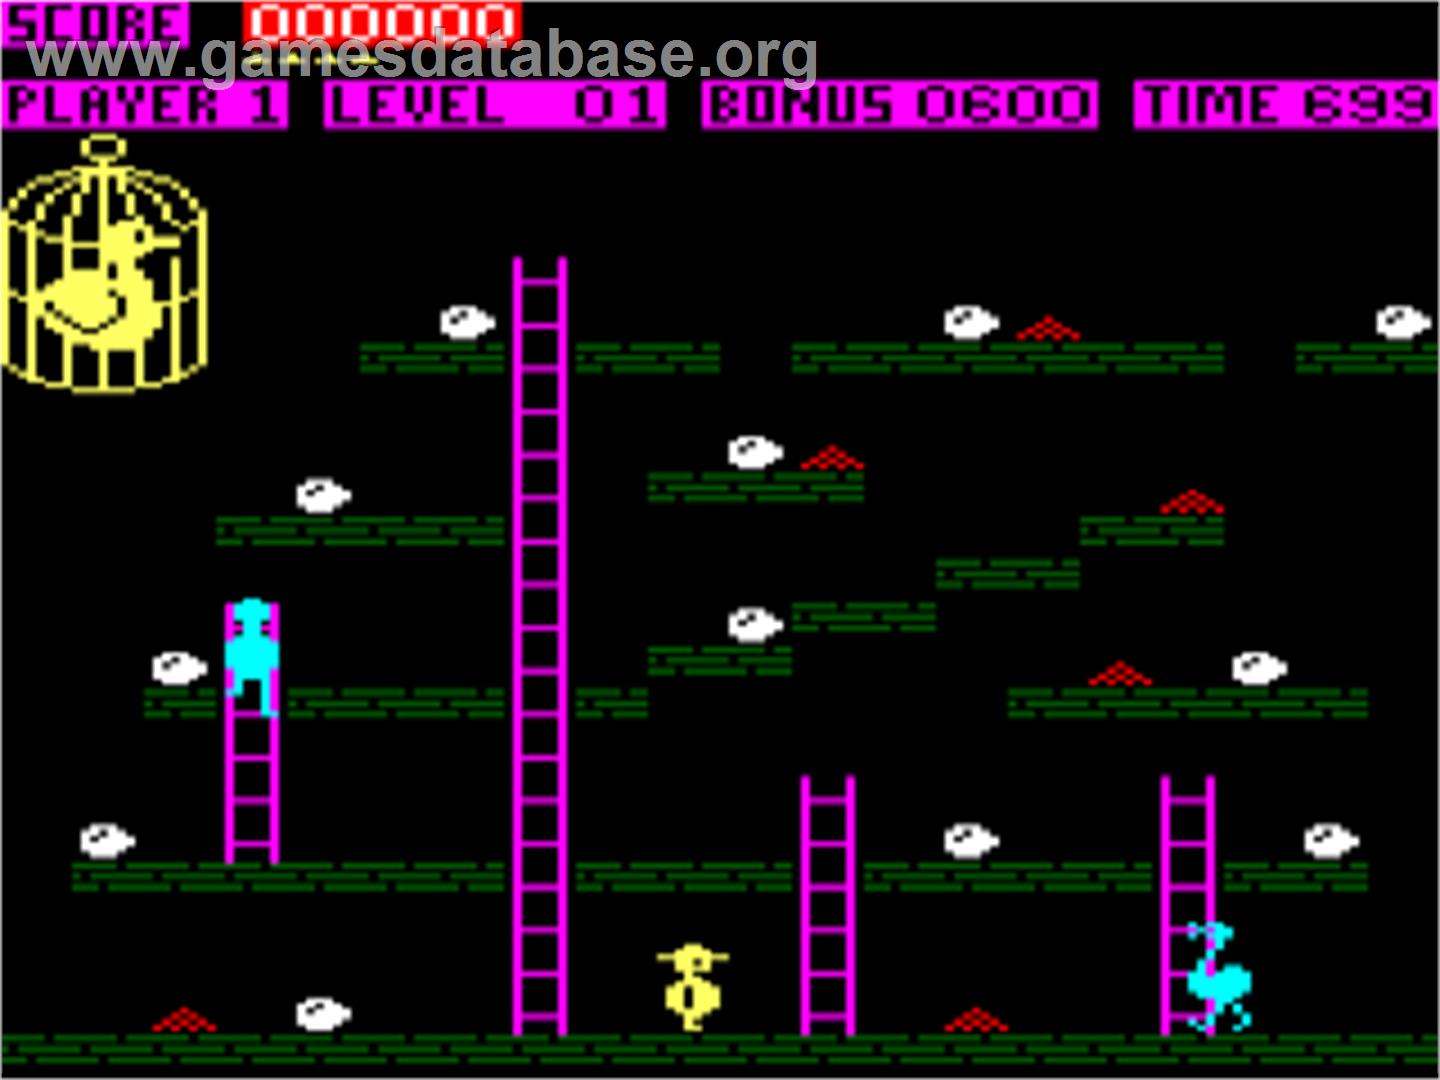 Chuckie Egg - Amstrad CPC - Artwork - In Game